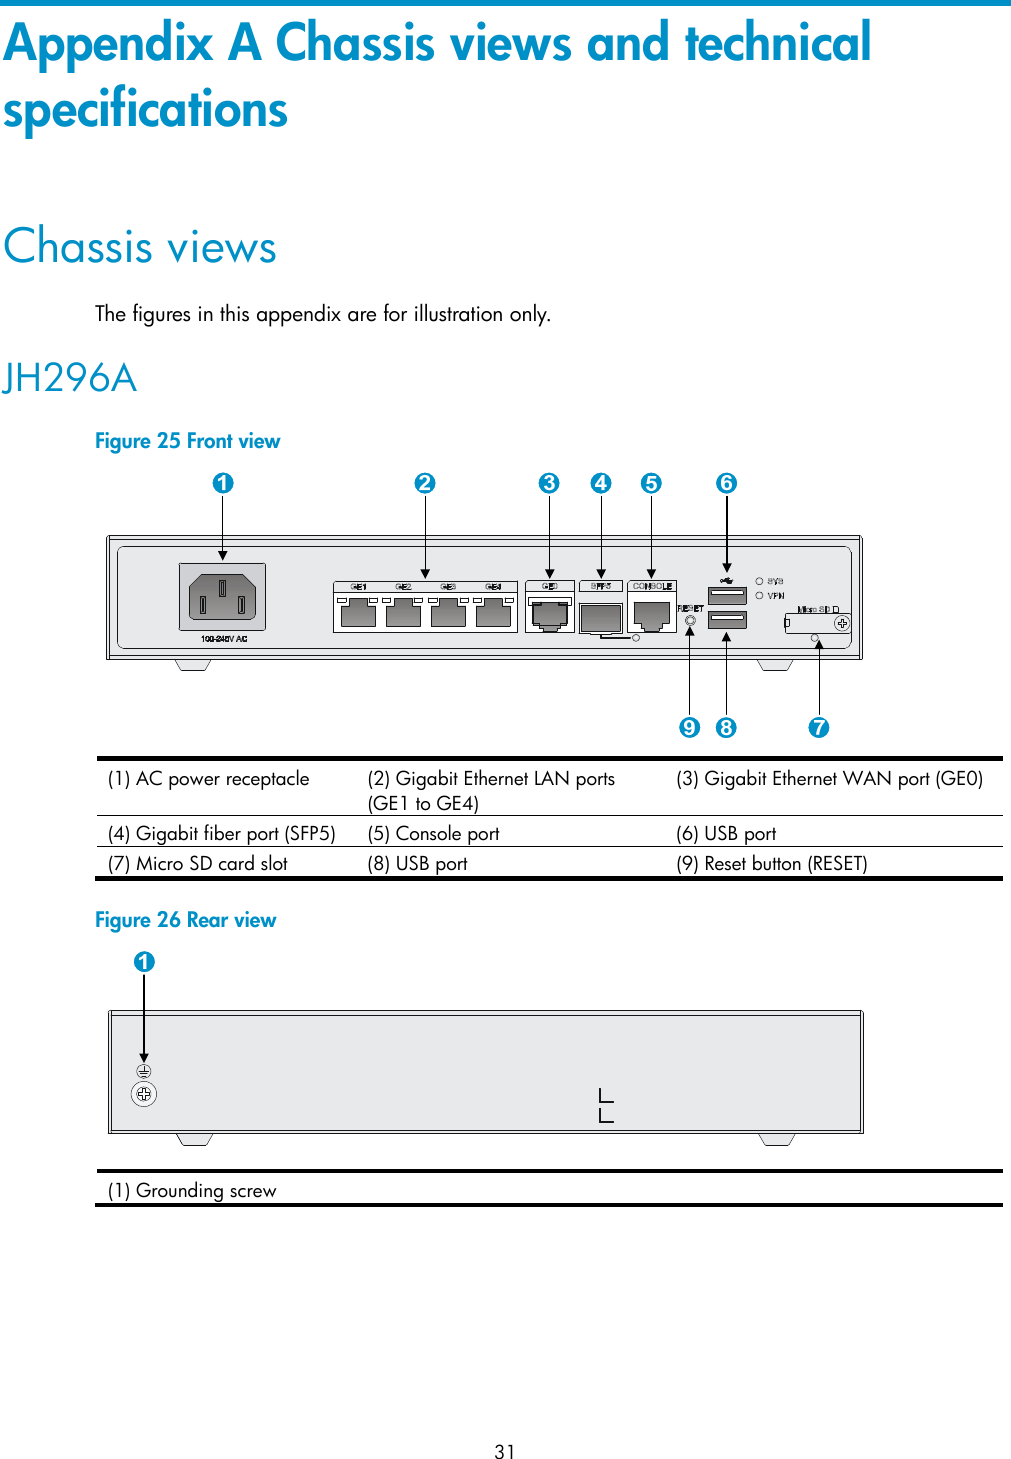  31 Appendix A Chassis views and technical specifications Chassis views The figures in this appendix are for illustration only. JH296A Figure 25 Front view  (1) AC power receptacle  (2) Gigabit Ethernet LAN ports (GE1 to GE4) (3) Gigabit Ethernet WAN port (GE0) (4) Gigabit fiber port (SFP5)  (5) Console port  (6) USB port (7) Micro SD card slot  (8) USB port (9) Reset button (RESET)  Figure 26 Rear view  (1) Grounding screw  